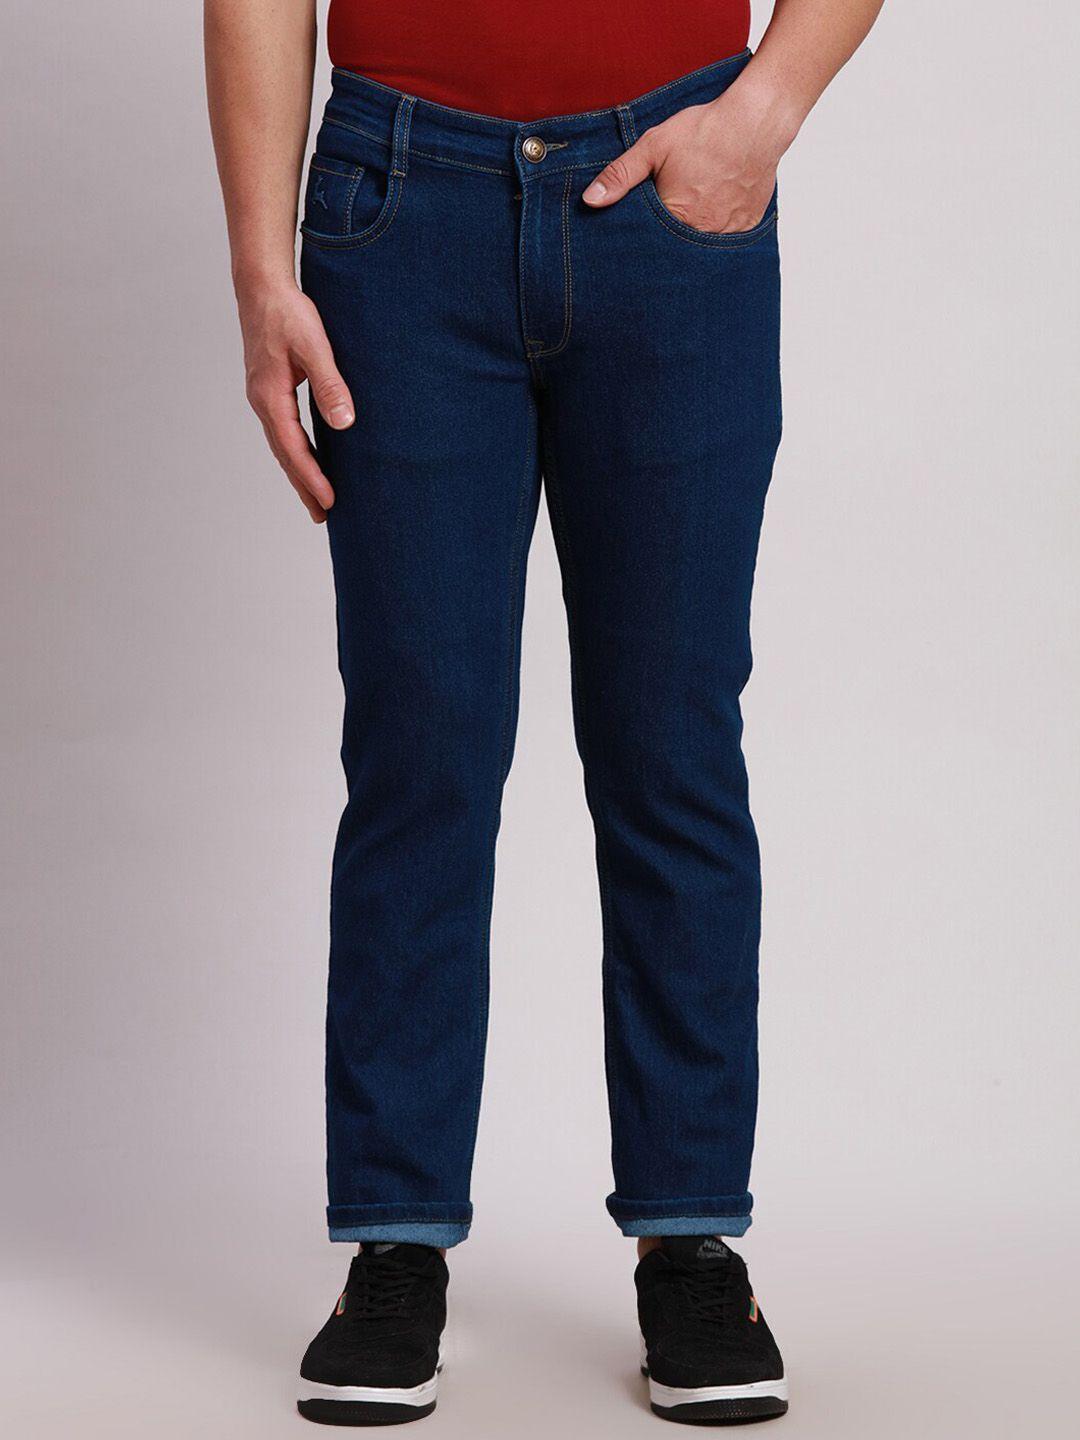 parx-men-tapered-fit-low-rise-stretchable-jeans